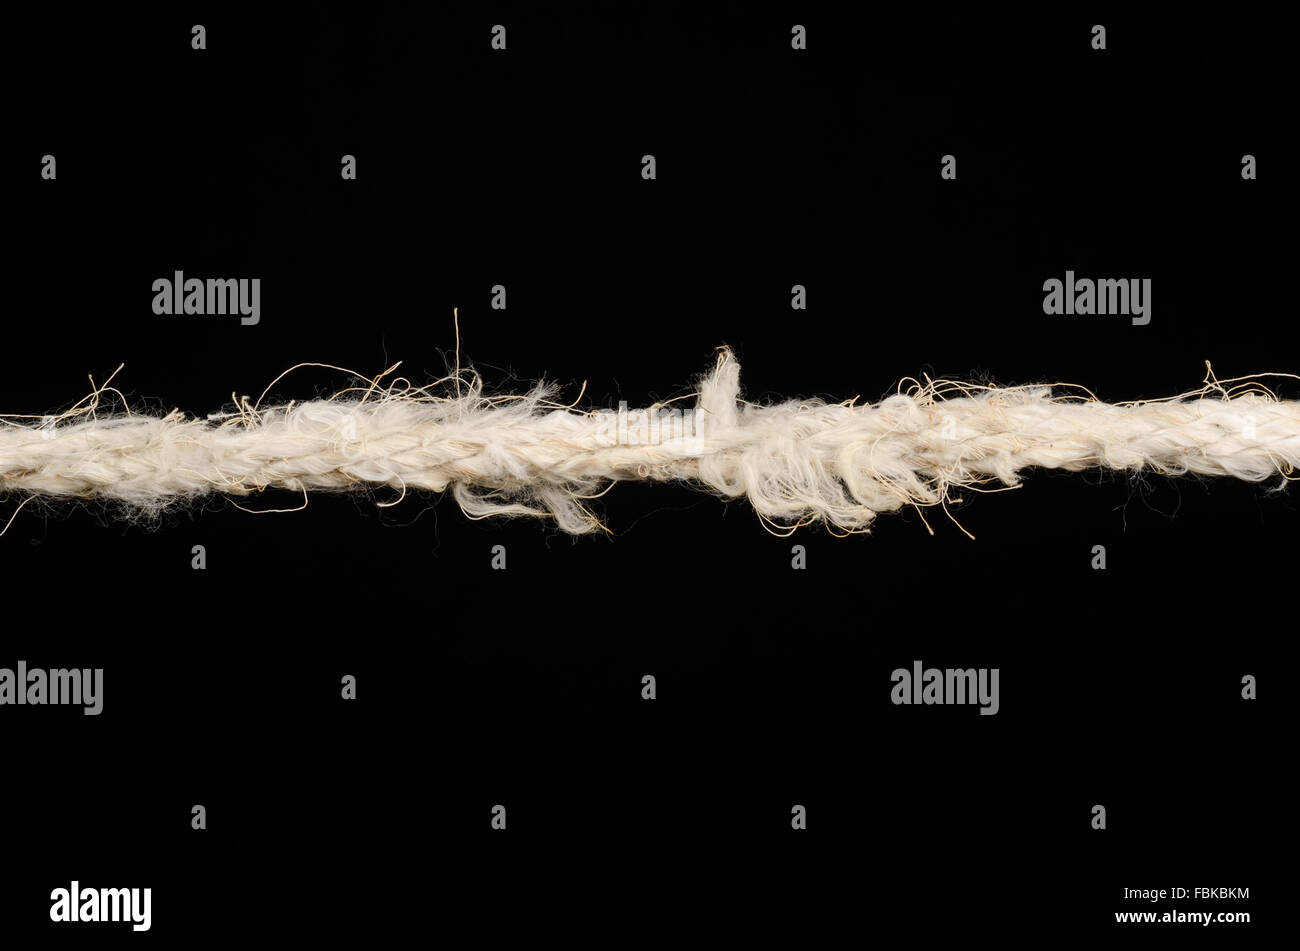 Rope about to break, a stress concept Stock Photo